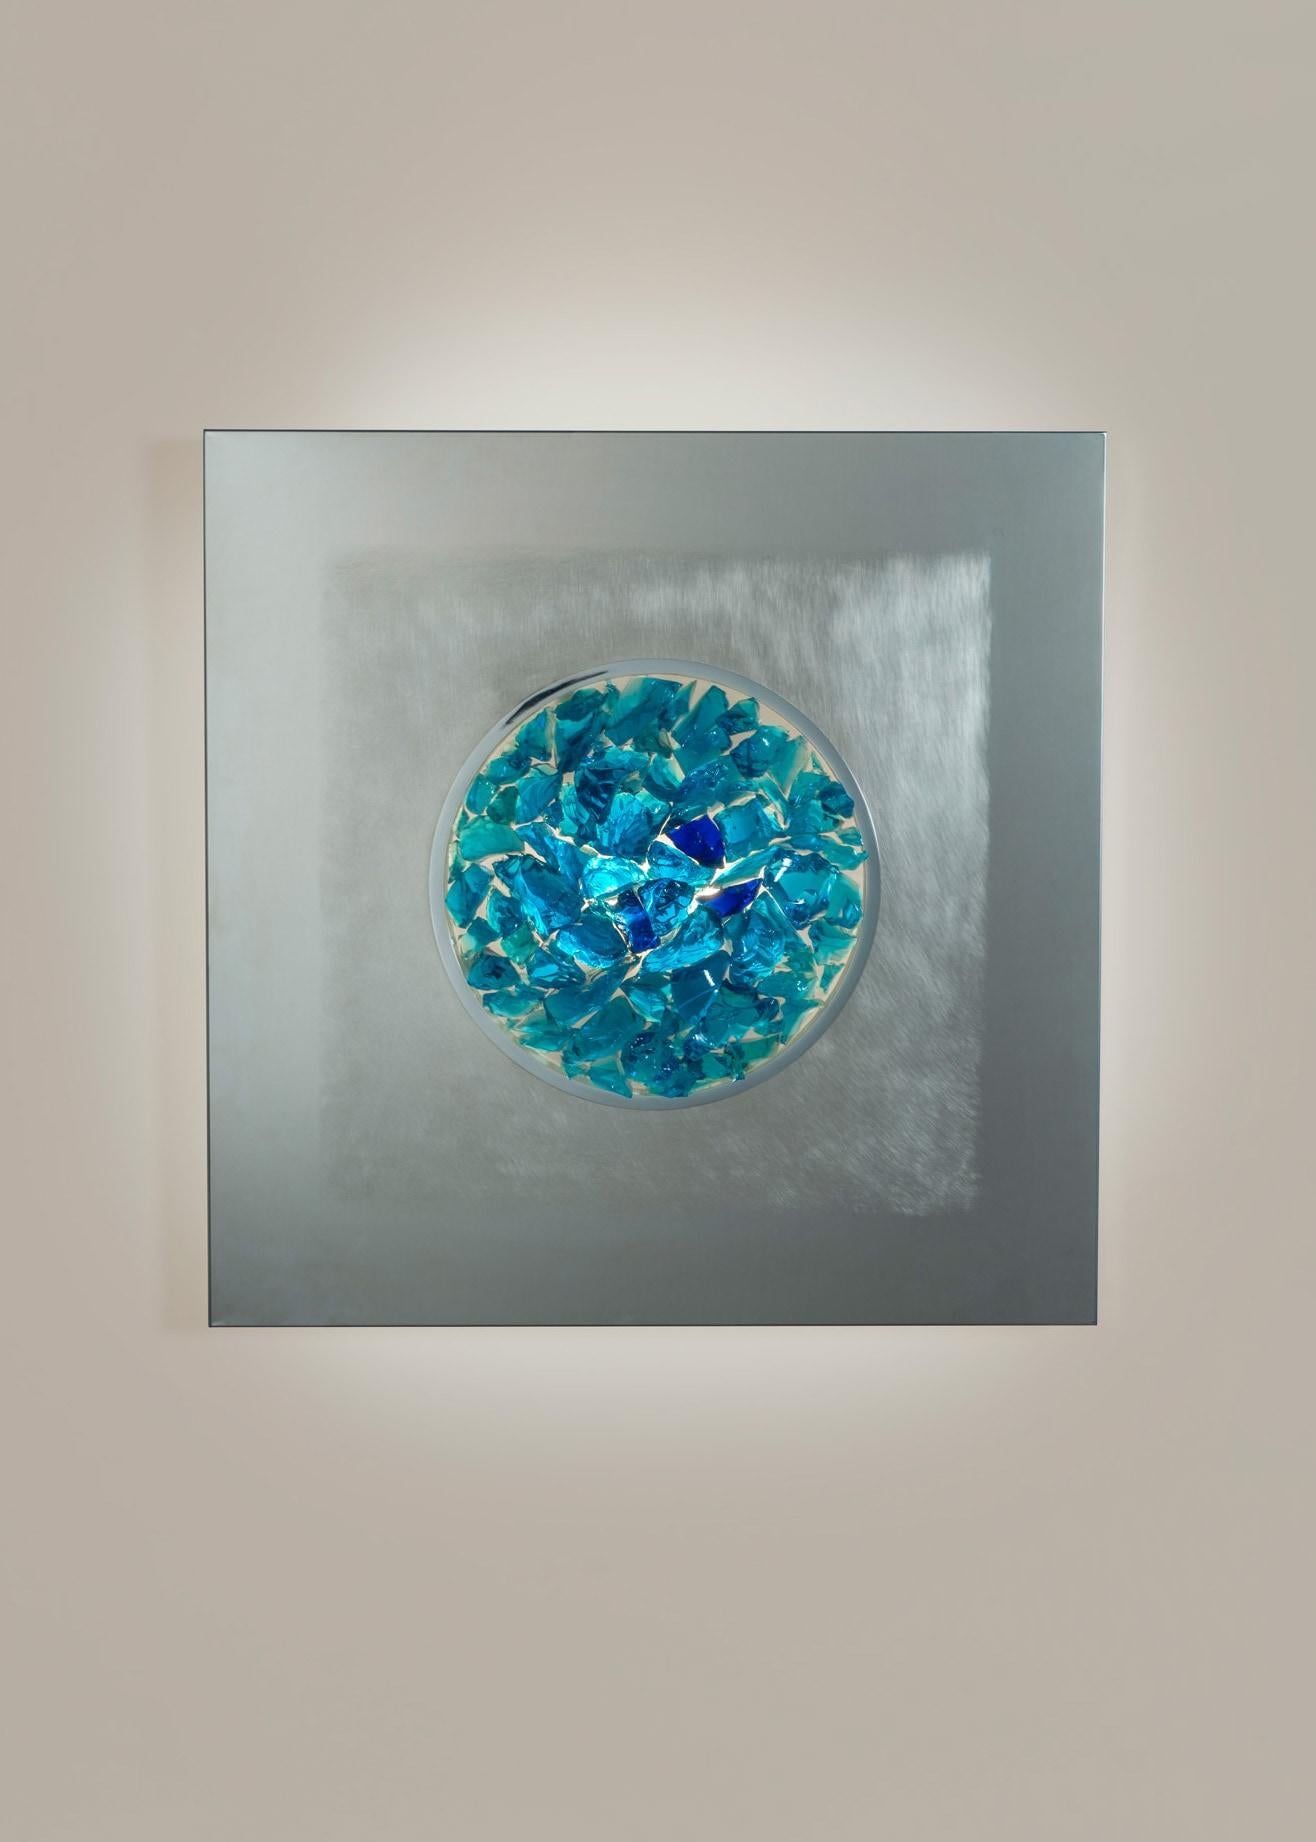 Luminous wall sculpture composed of a box element in polished and satin stainless steel. Arranged in the center irregular elements in Murano glass in shades of blue.
